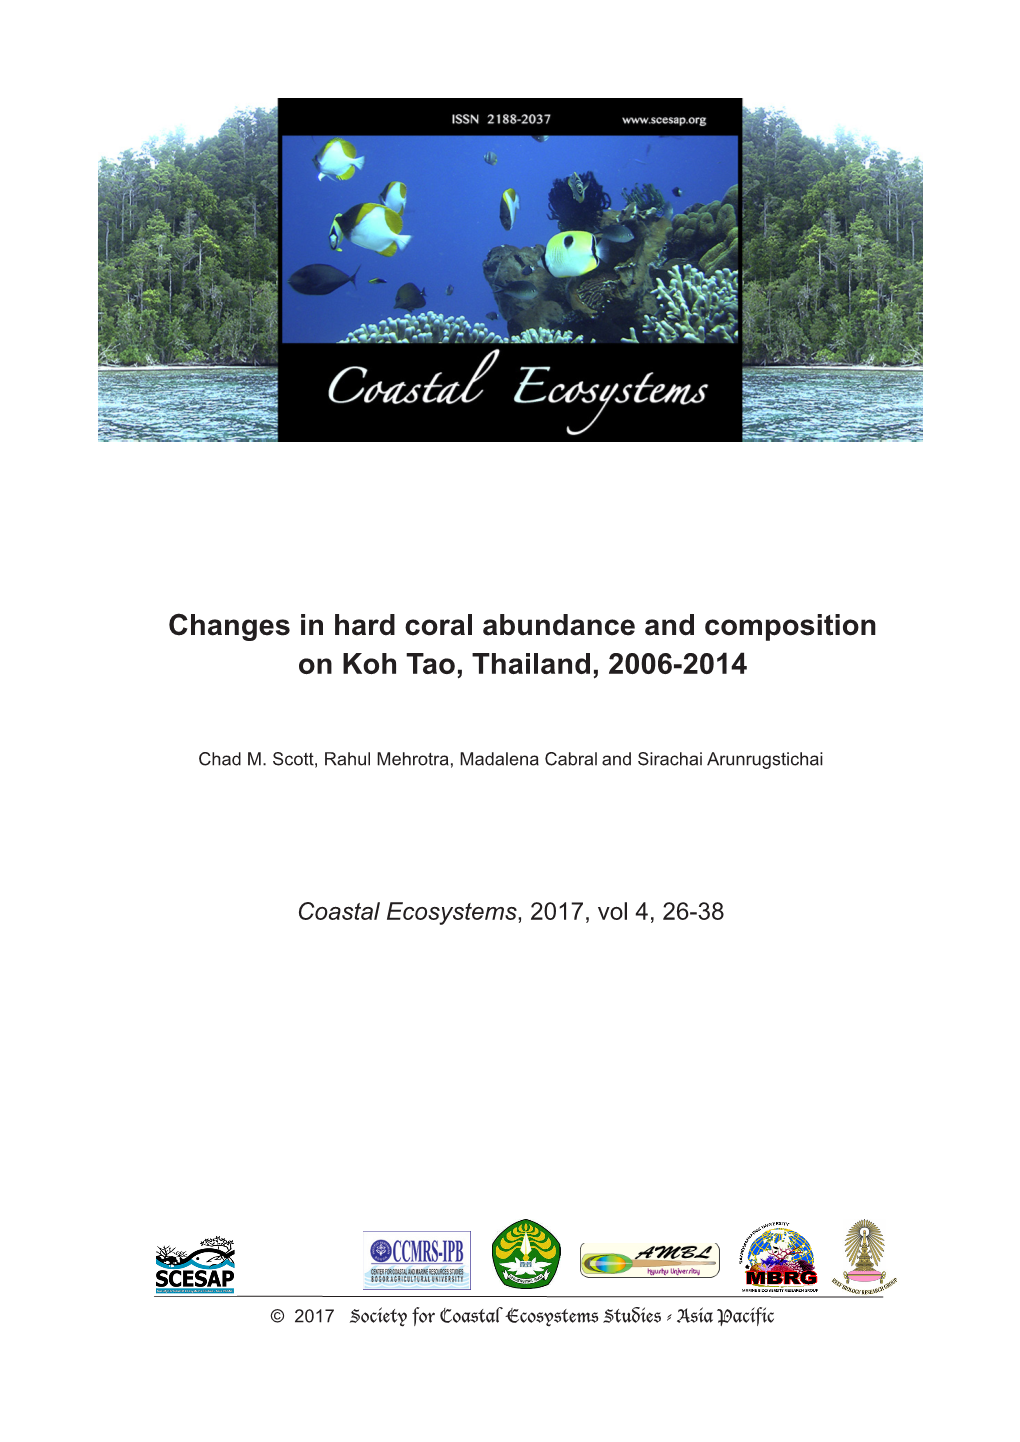 Changes in Hard Coral Abundance and Composition on Koh Tao, Thailand, 2006-2014